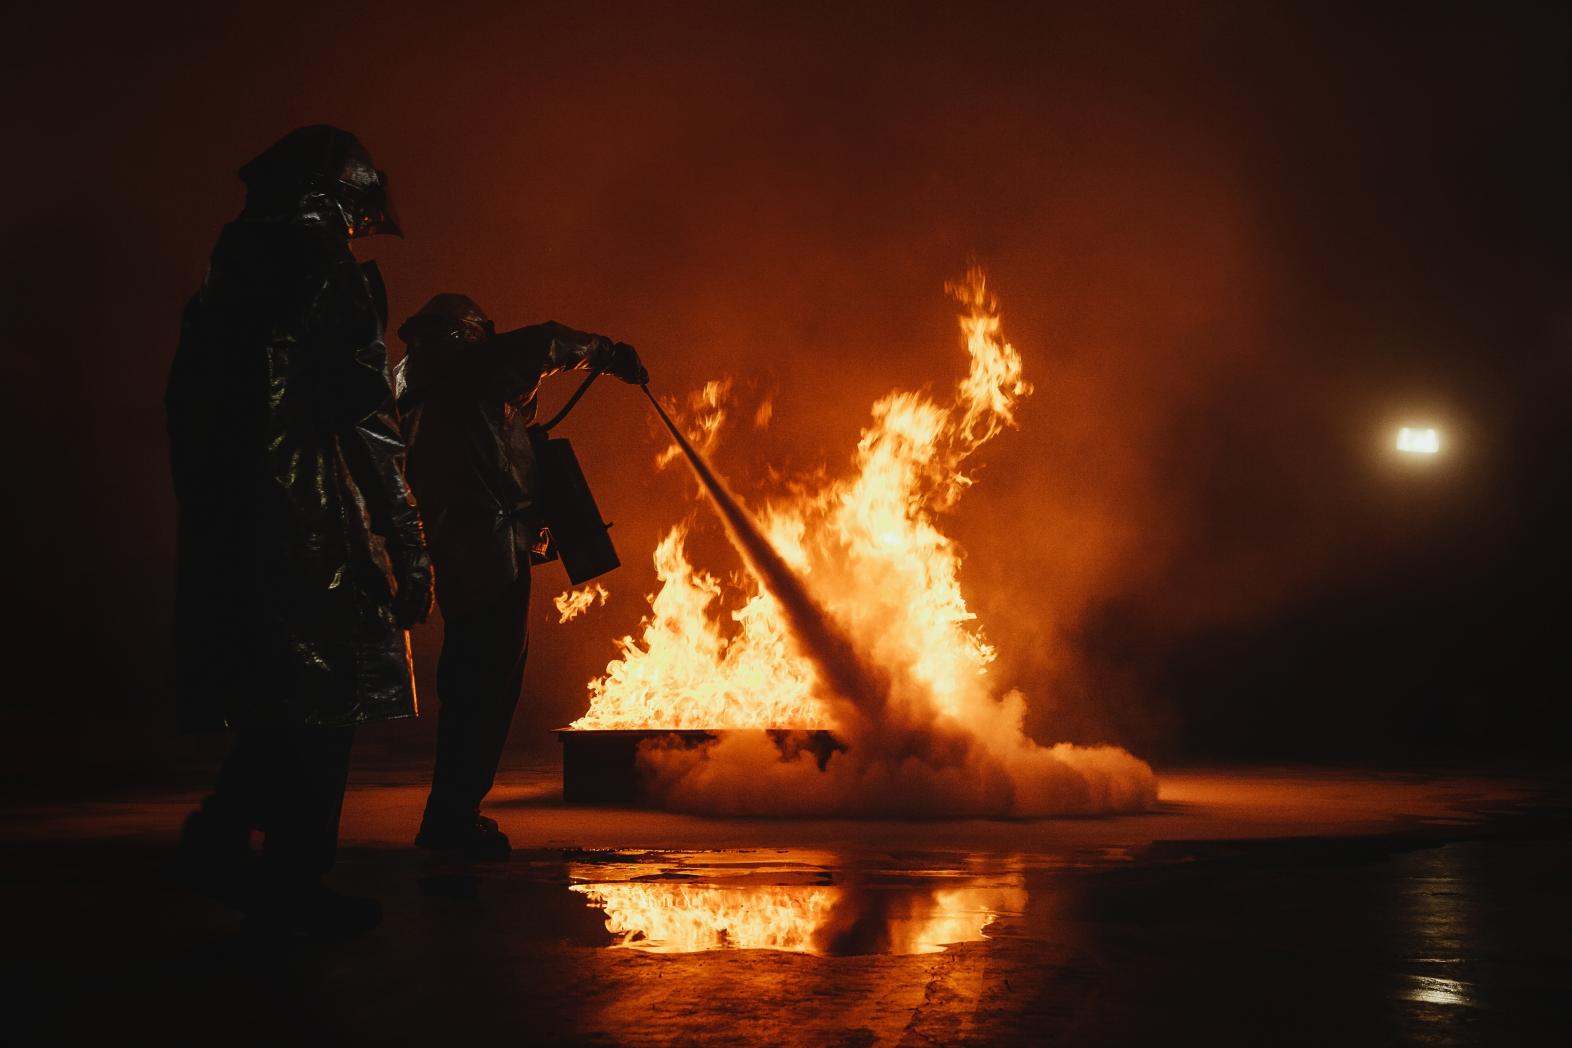 Firefighters extinguish a fire in a laboratory environment